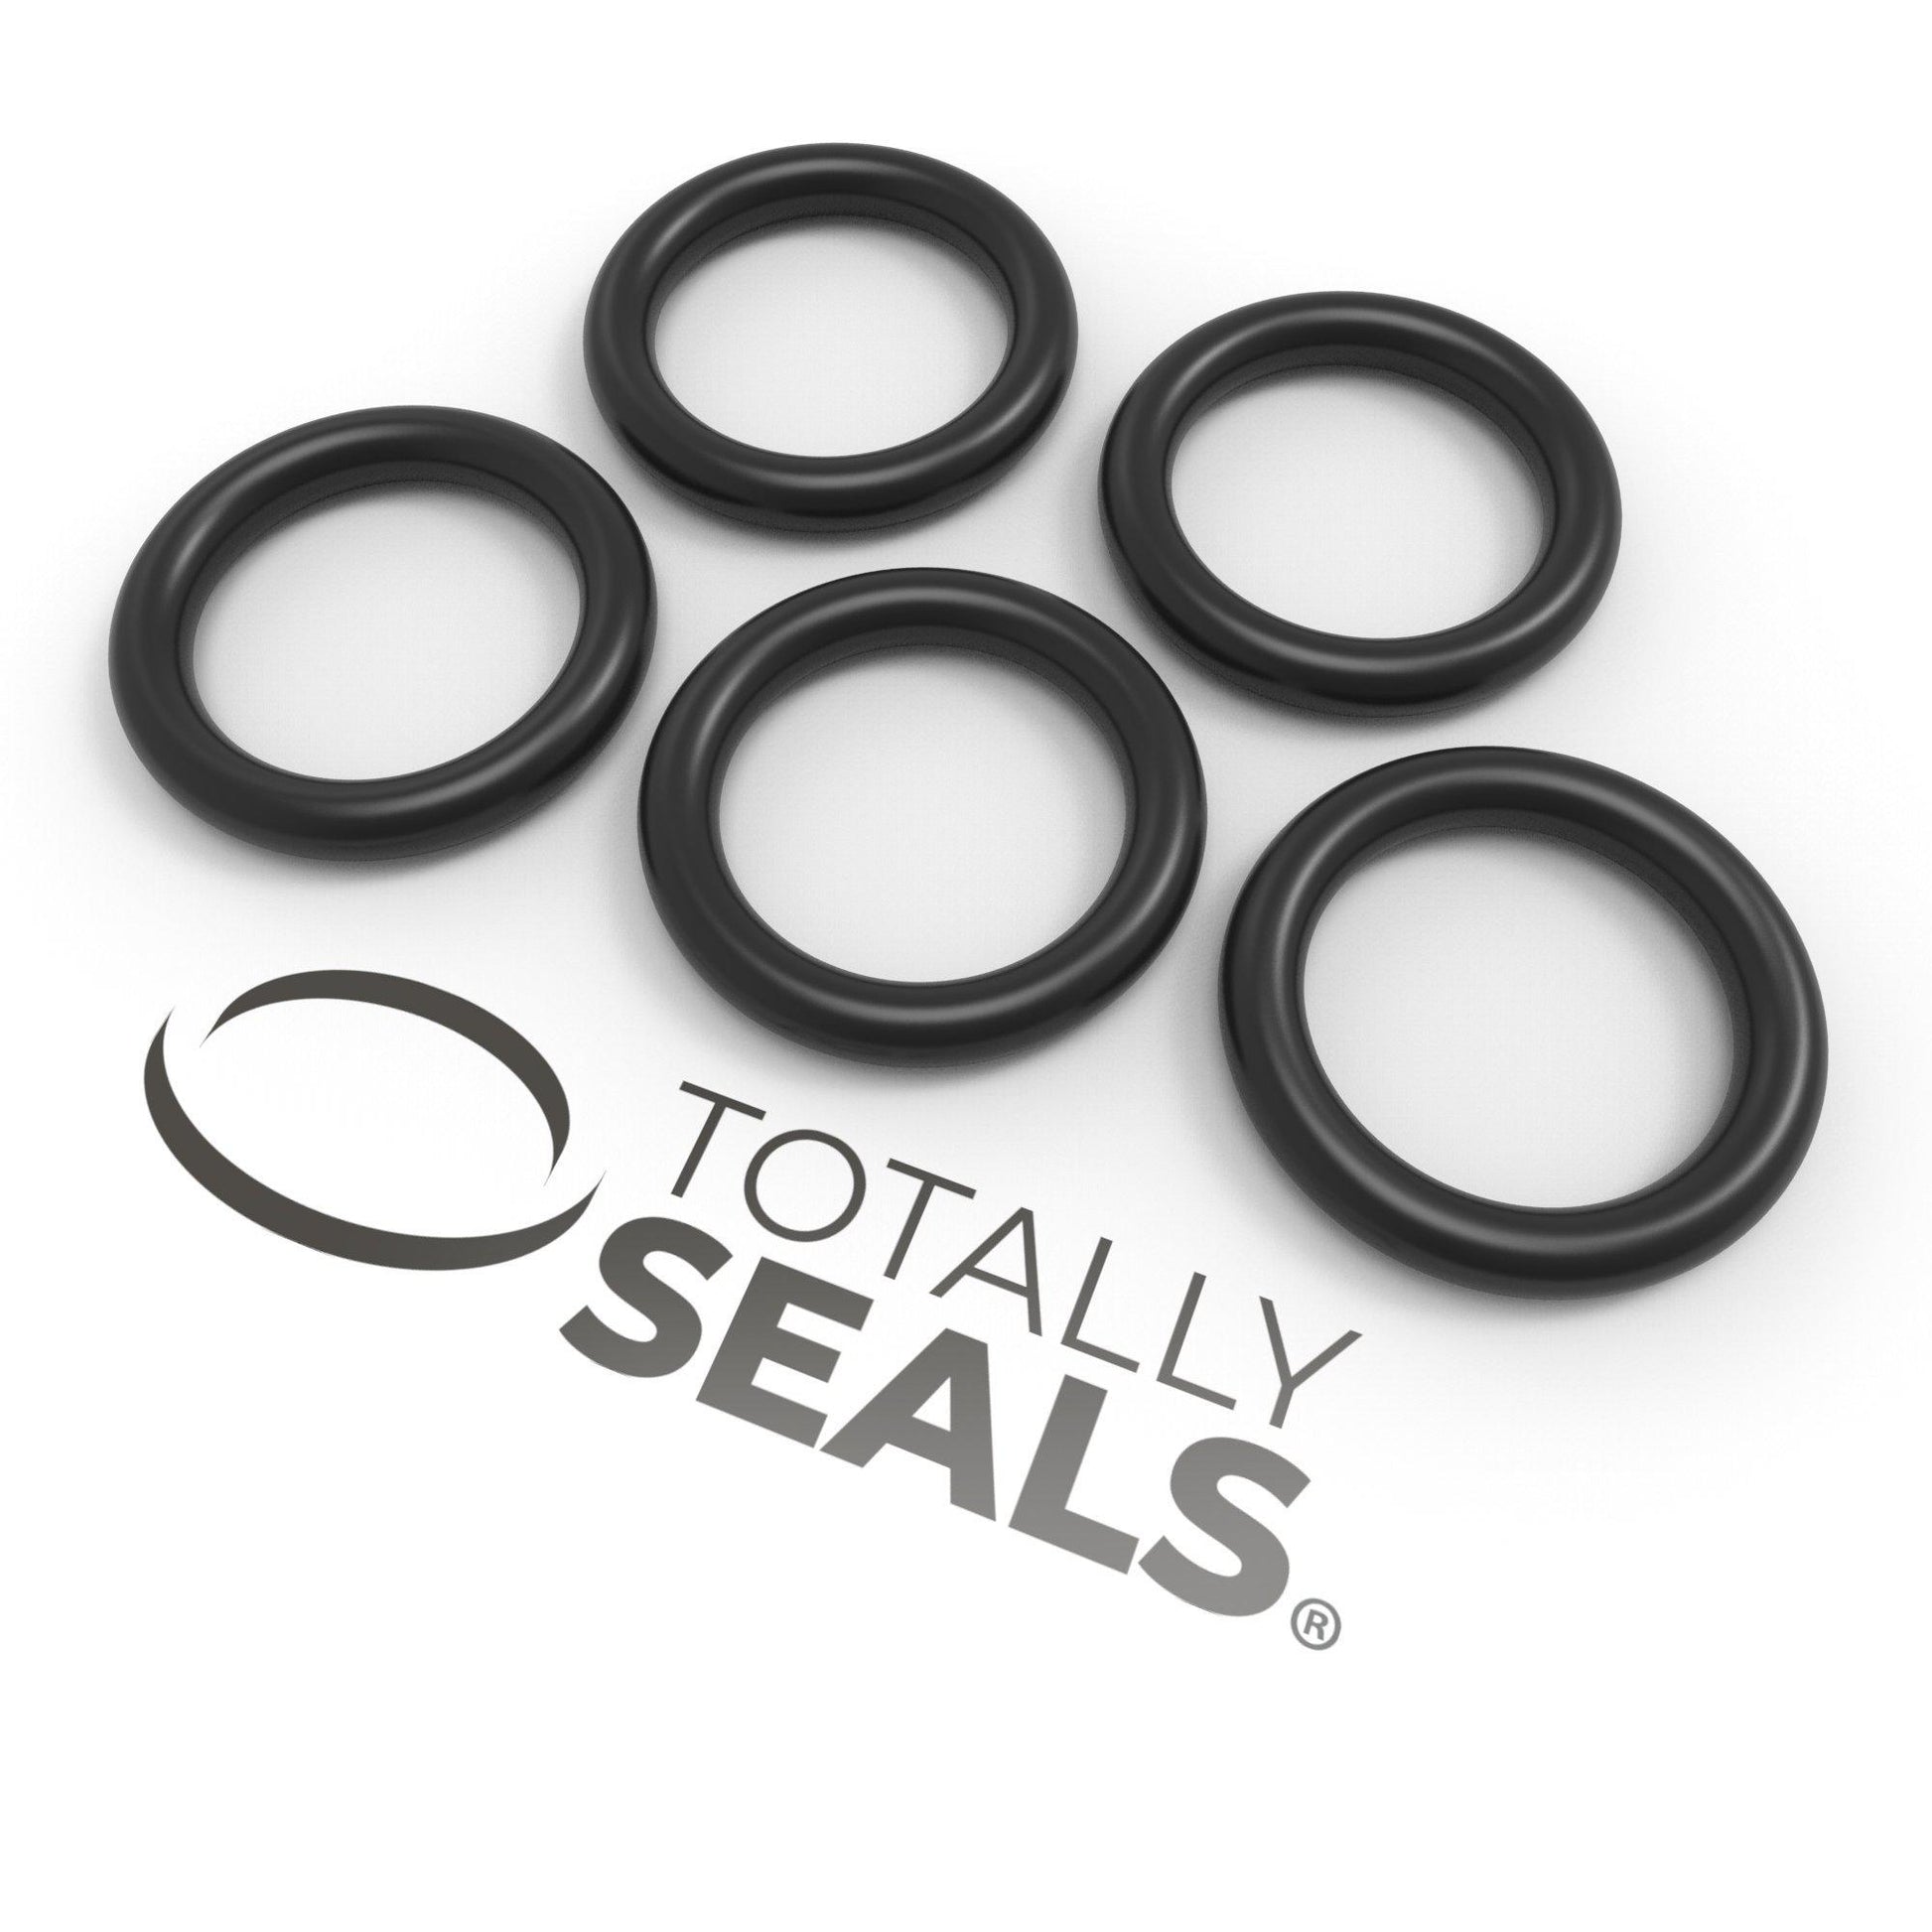 3mm x 1.5mm (6mm OD) Nitrile O-Rings - Totally Seals®